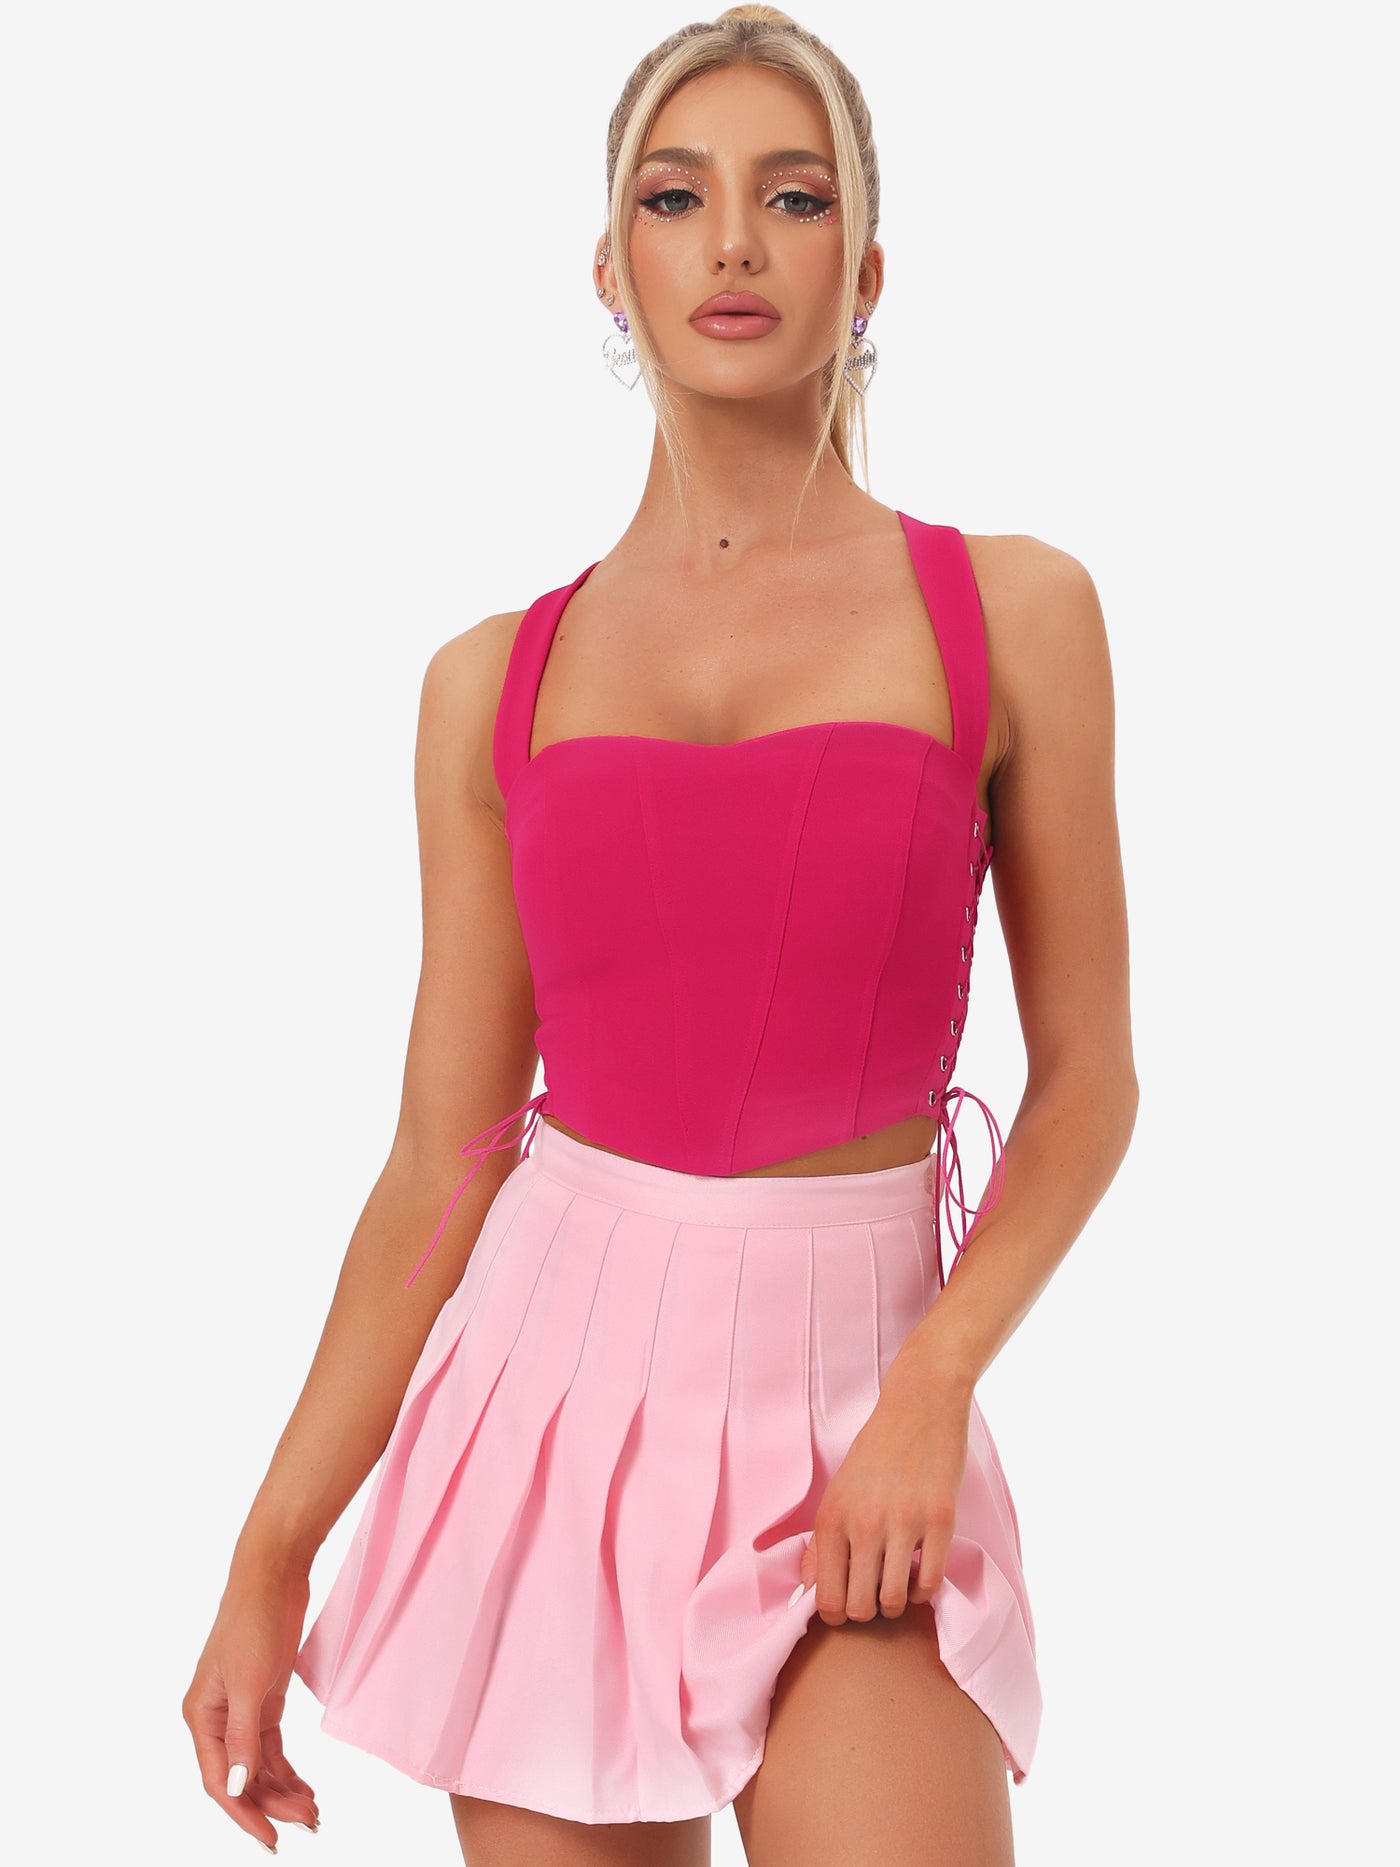 Allegra K Sleeveless Bustier Corset Tops Lace-up Sexy Clubwear Party Crop Top